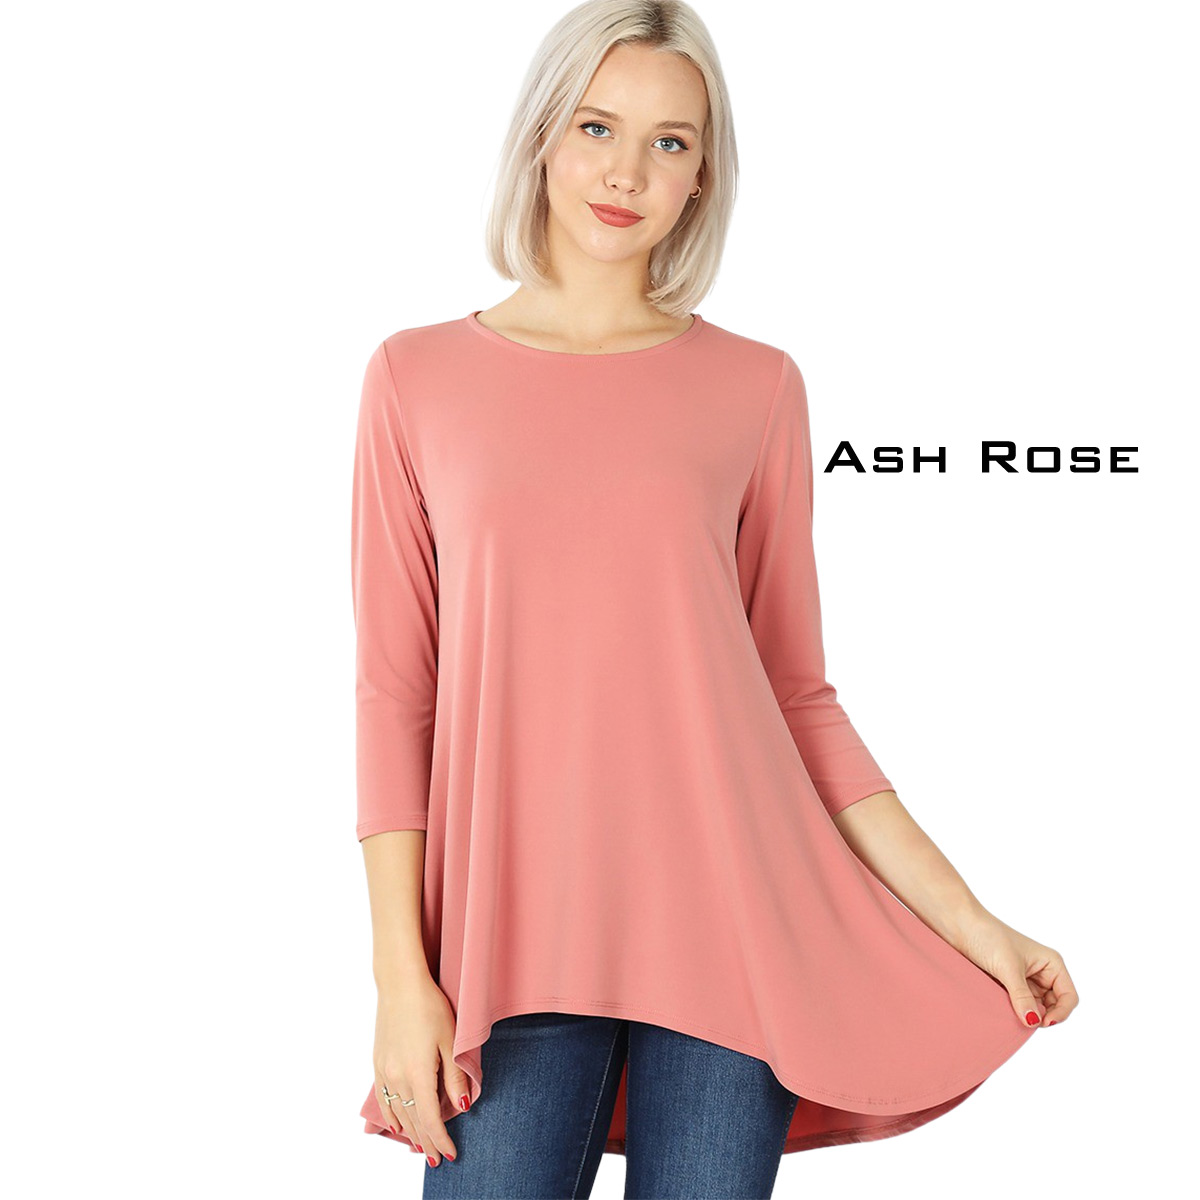 2367 - Ity High-Low 3/4 Sleeve Top ASH ROSE Ity High-Low 3/4 Sleeve Top 2367 - X-Large